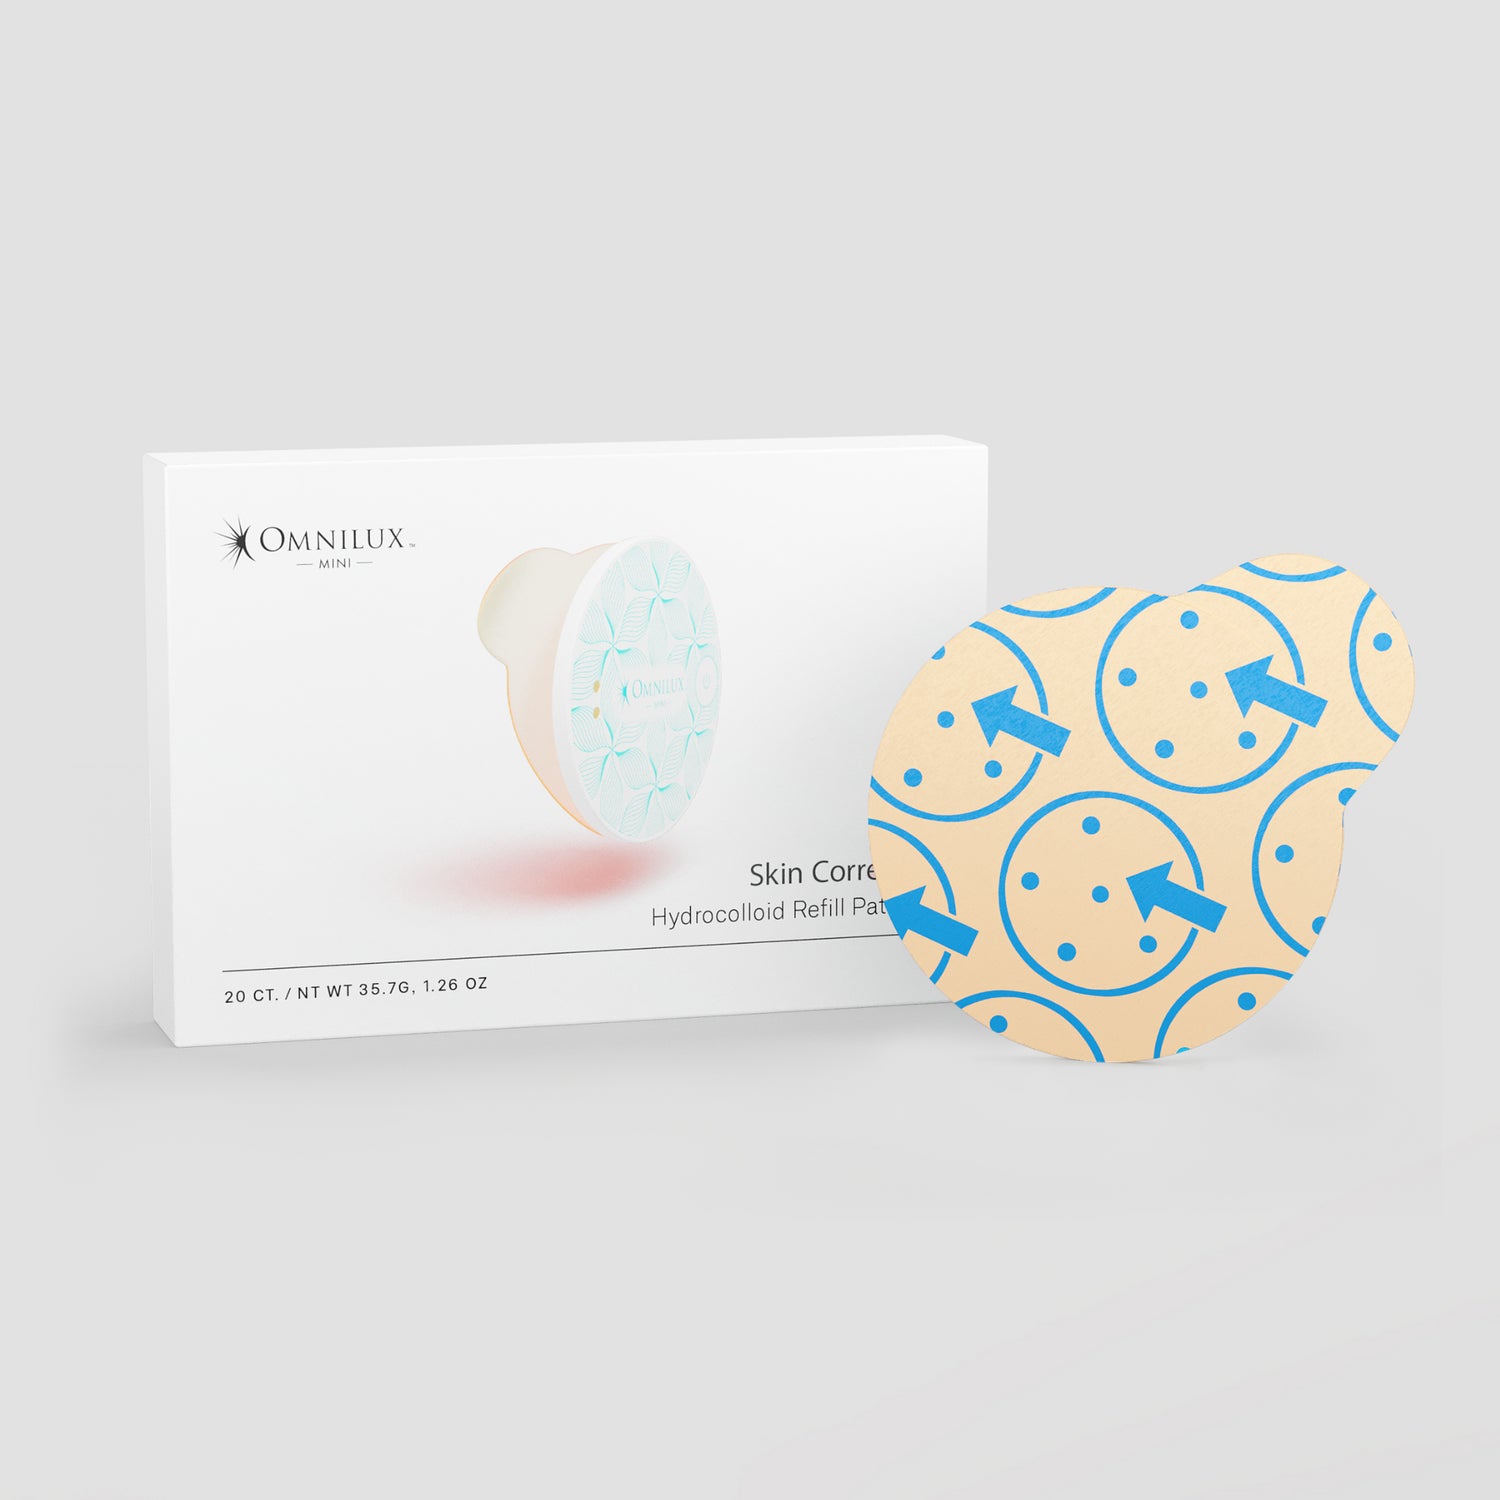 Skin Corrector Hydrocolloid Refill Patches (20 ct)